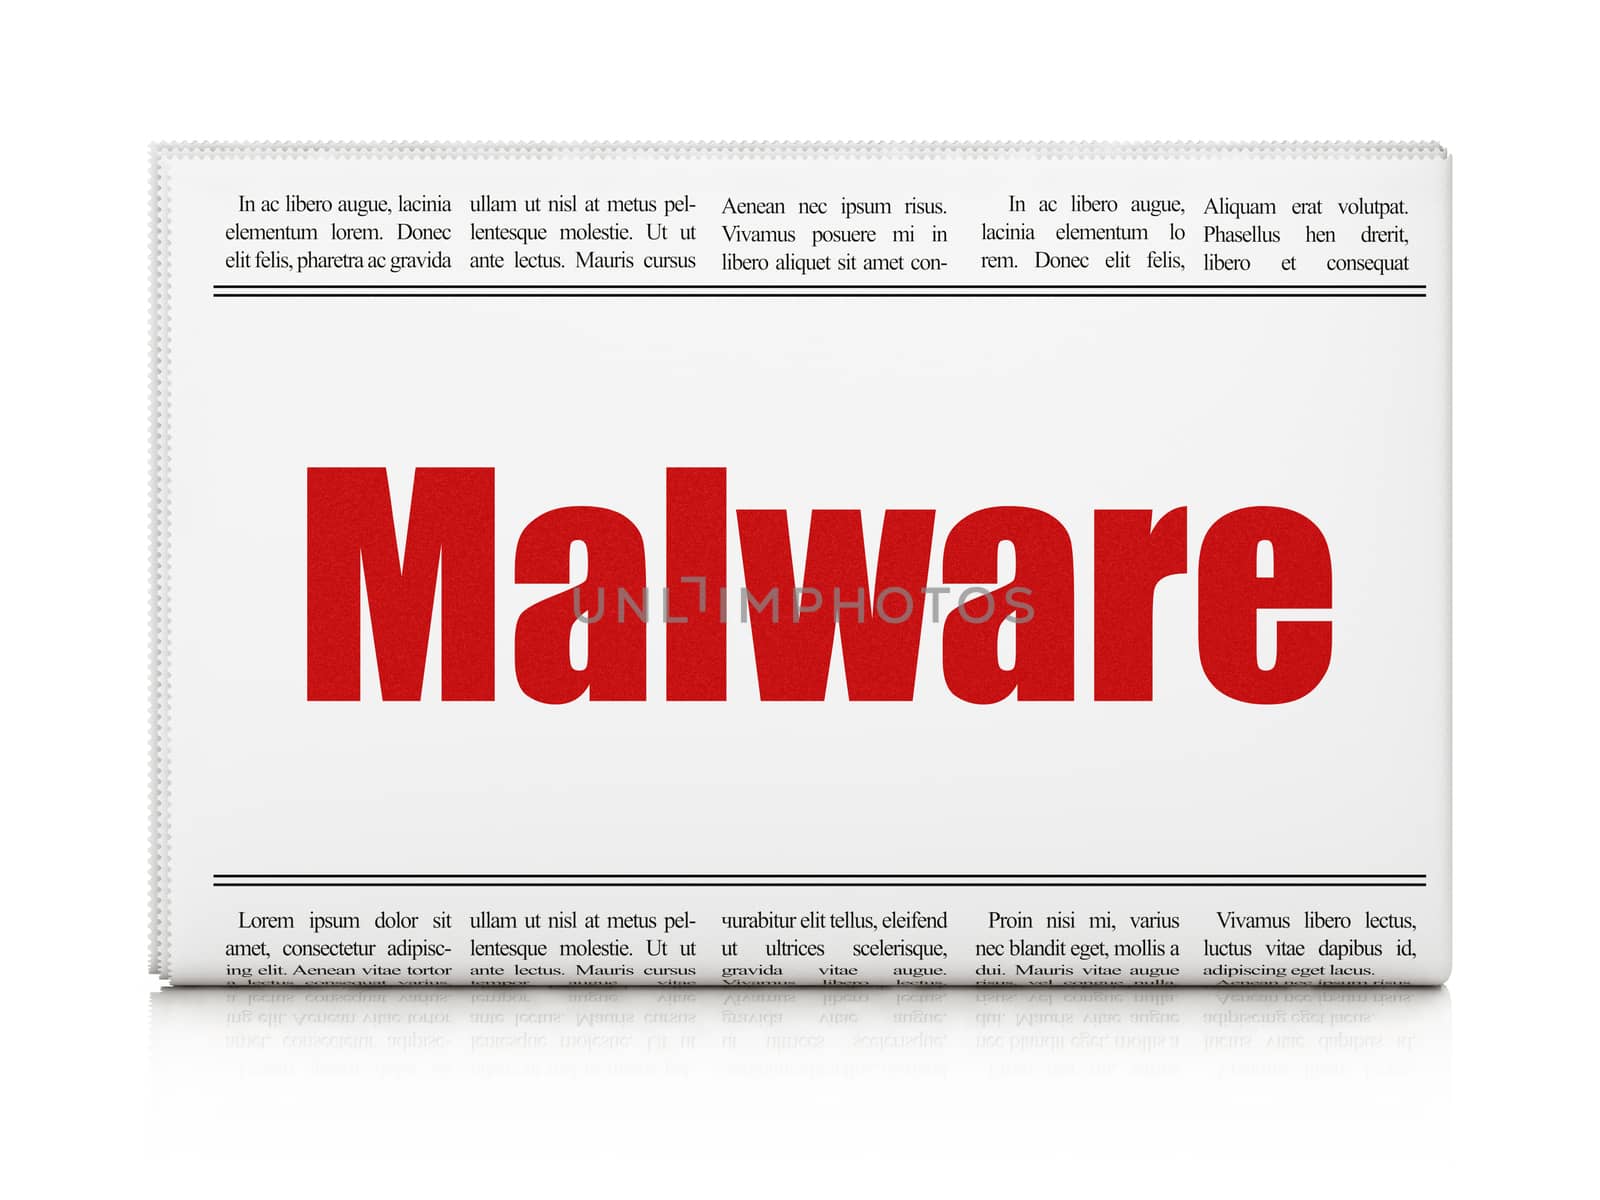 Protection concept: newspaper headline Malware on White background, 3d render